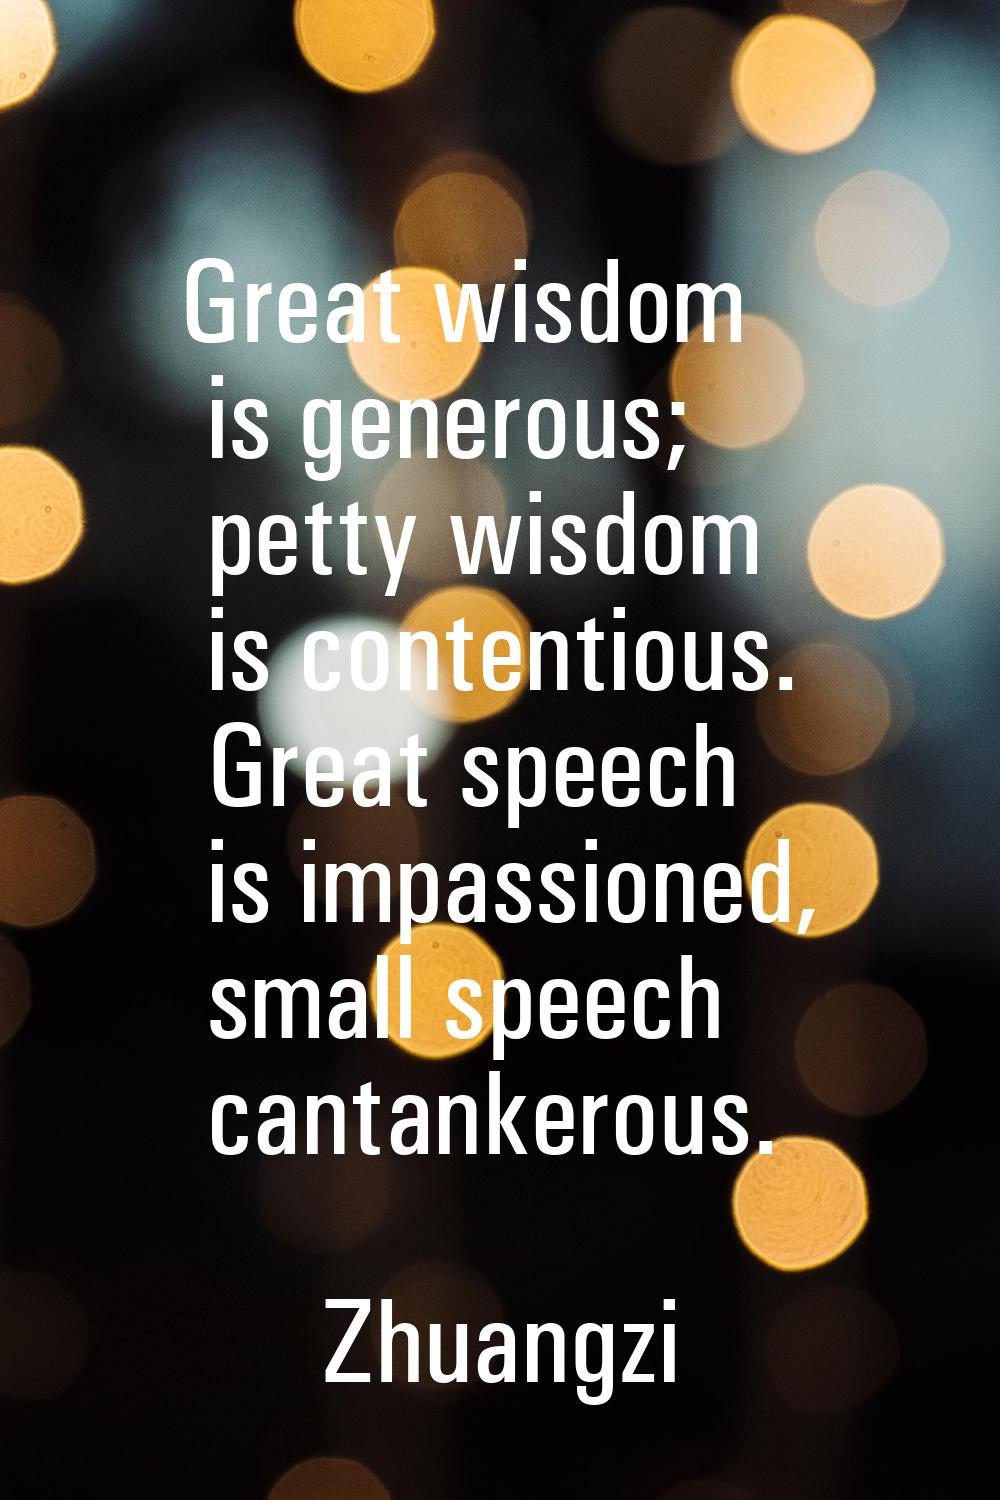 Great wisdom is generous; petty wisdom is contentious. Great speech is impassioned, small speech ca